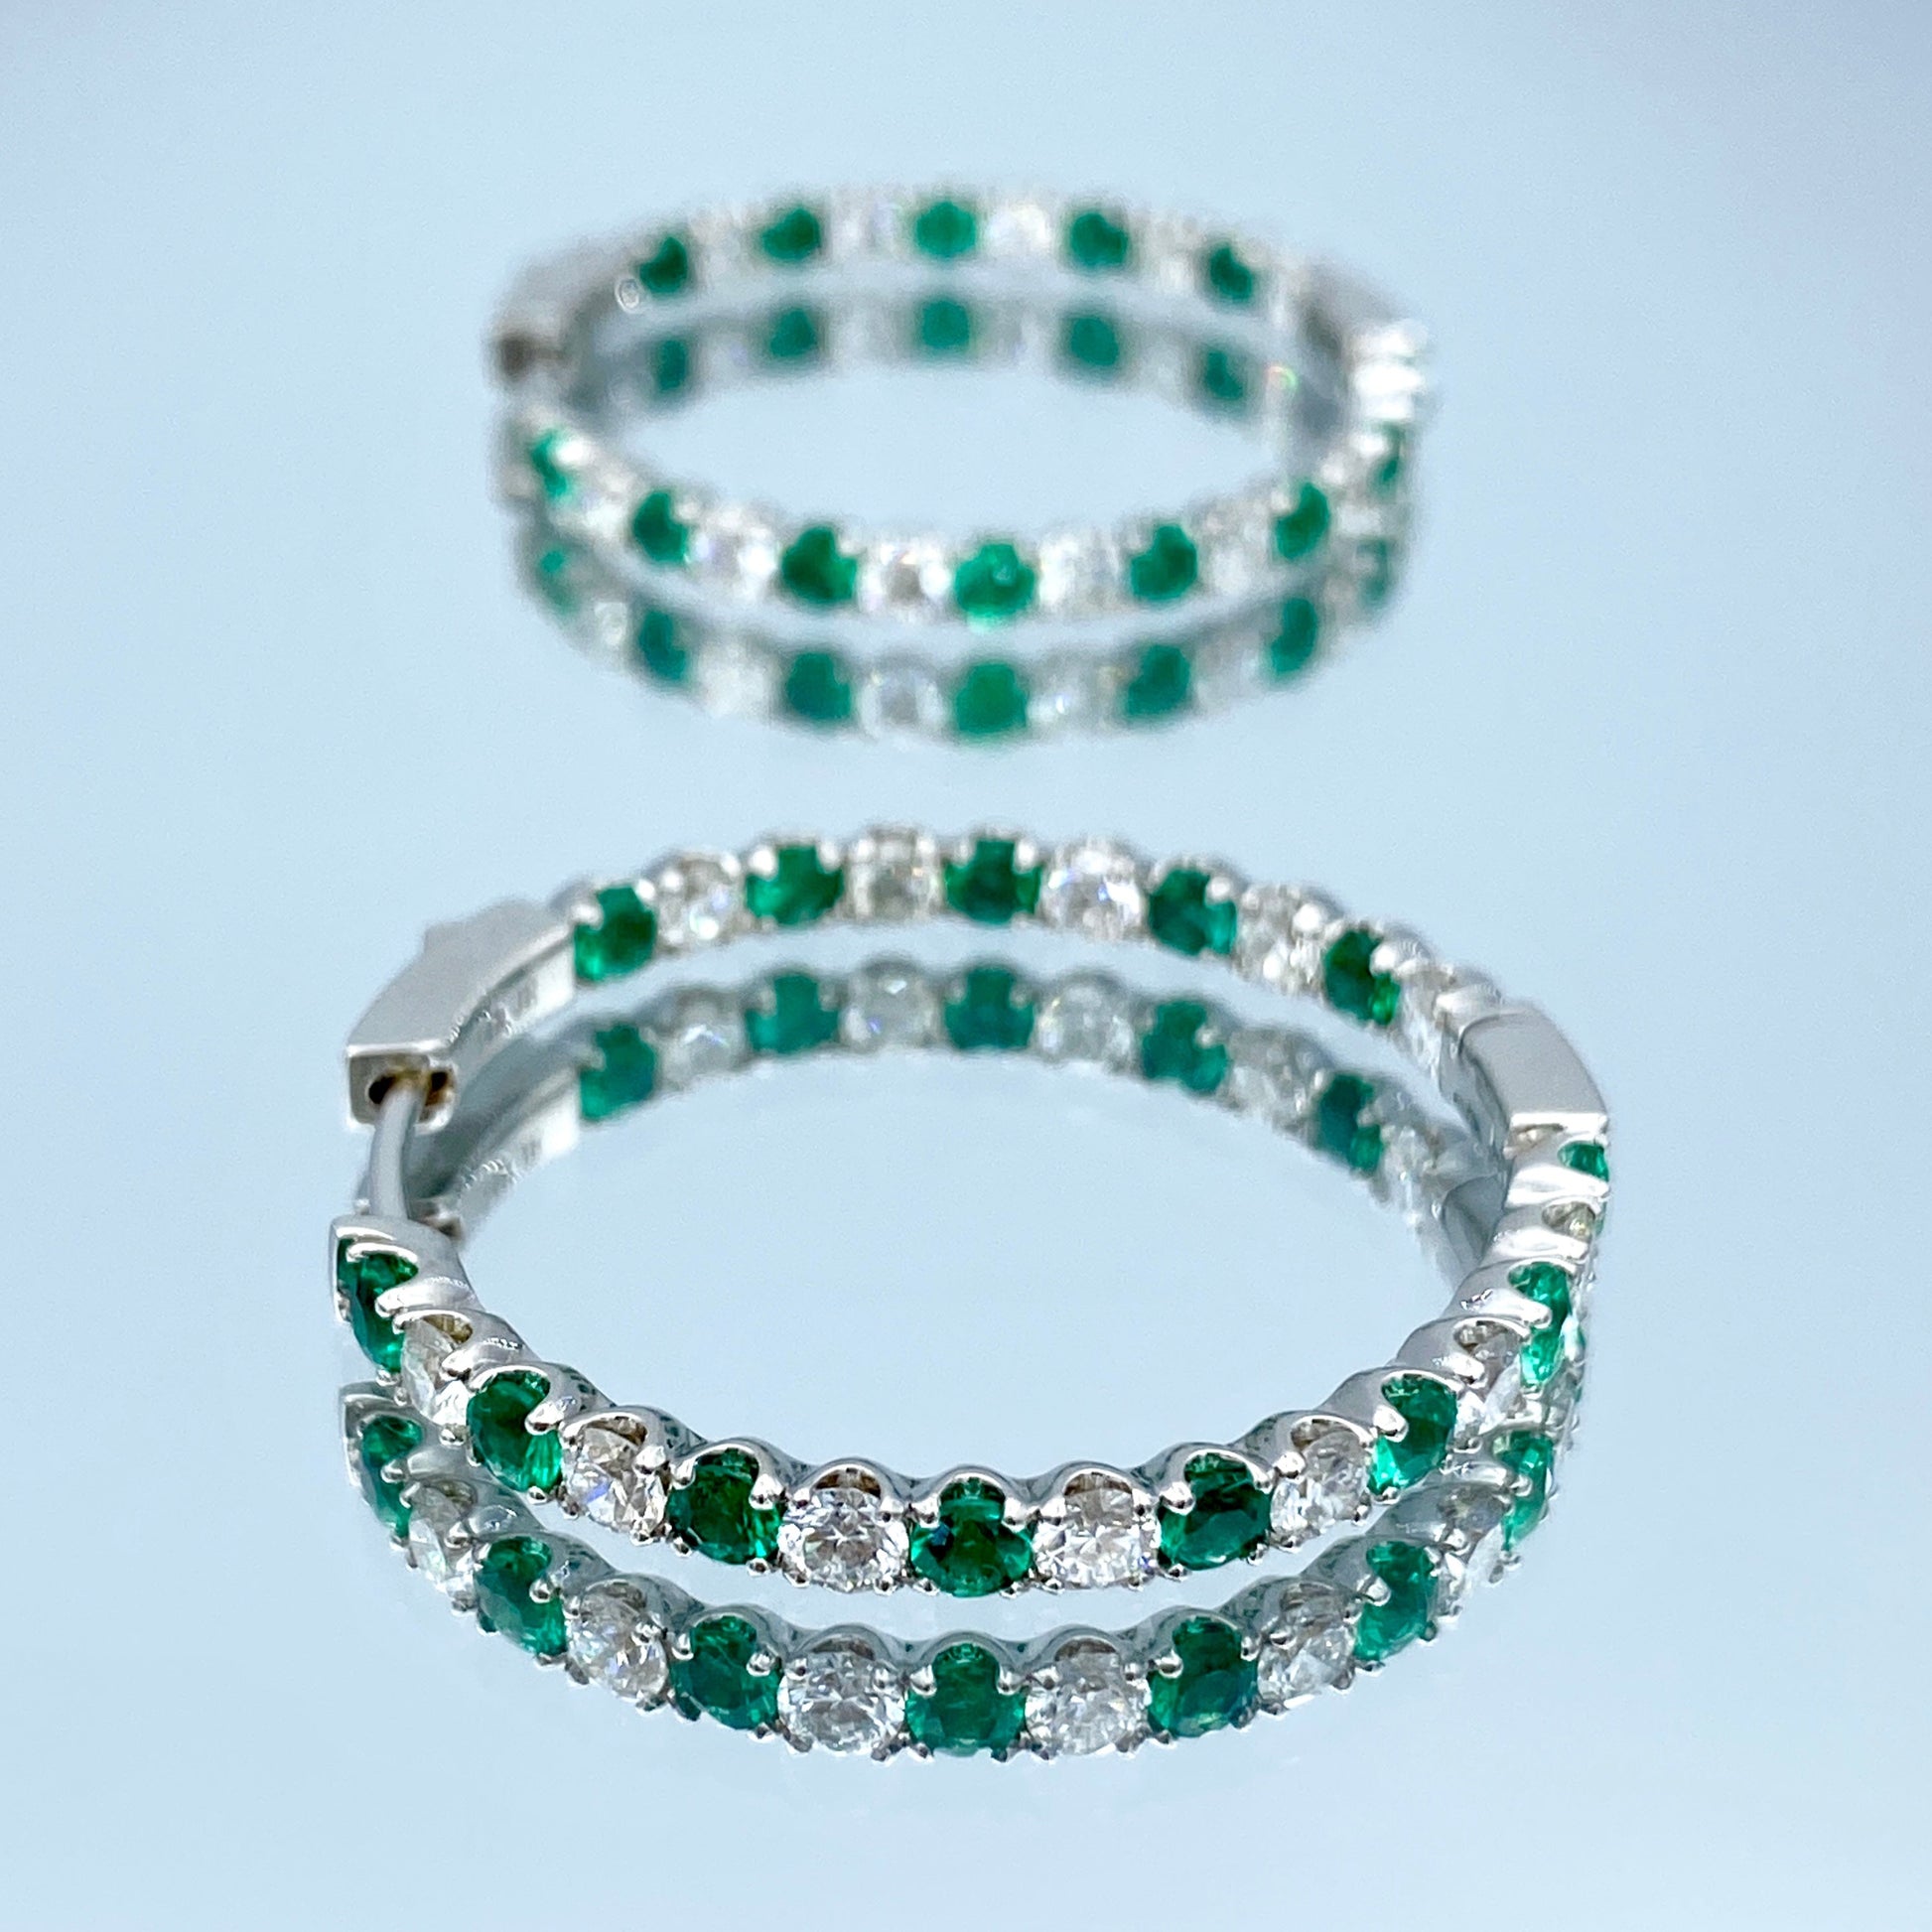 Inside-Out Alternating Emerald and Diamond Hoop Earrings in 14K White Gold - L and L Jewelry